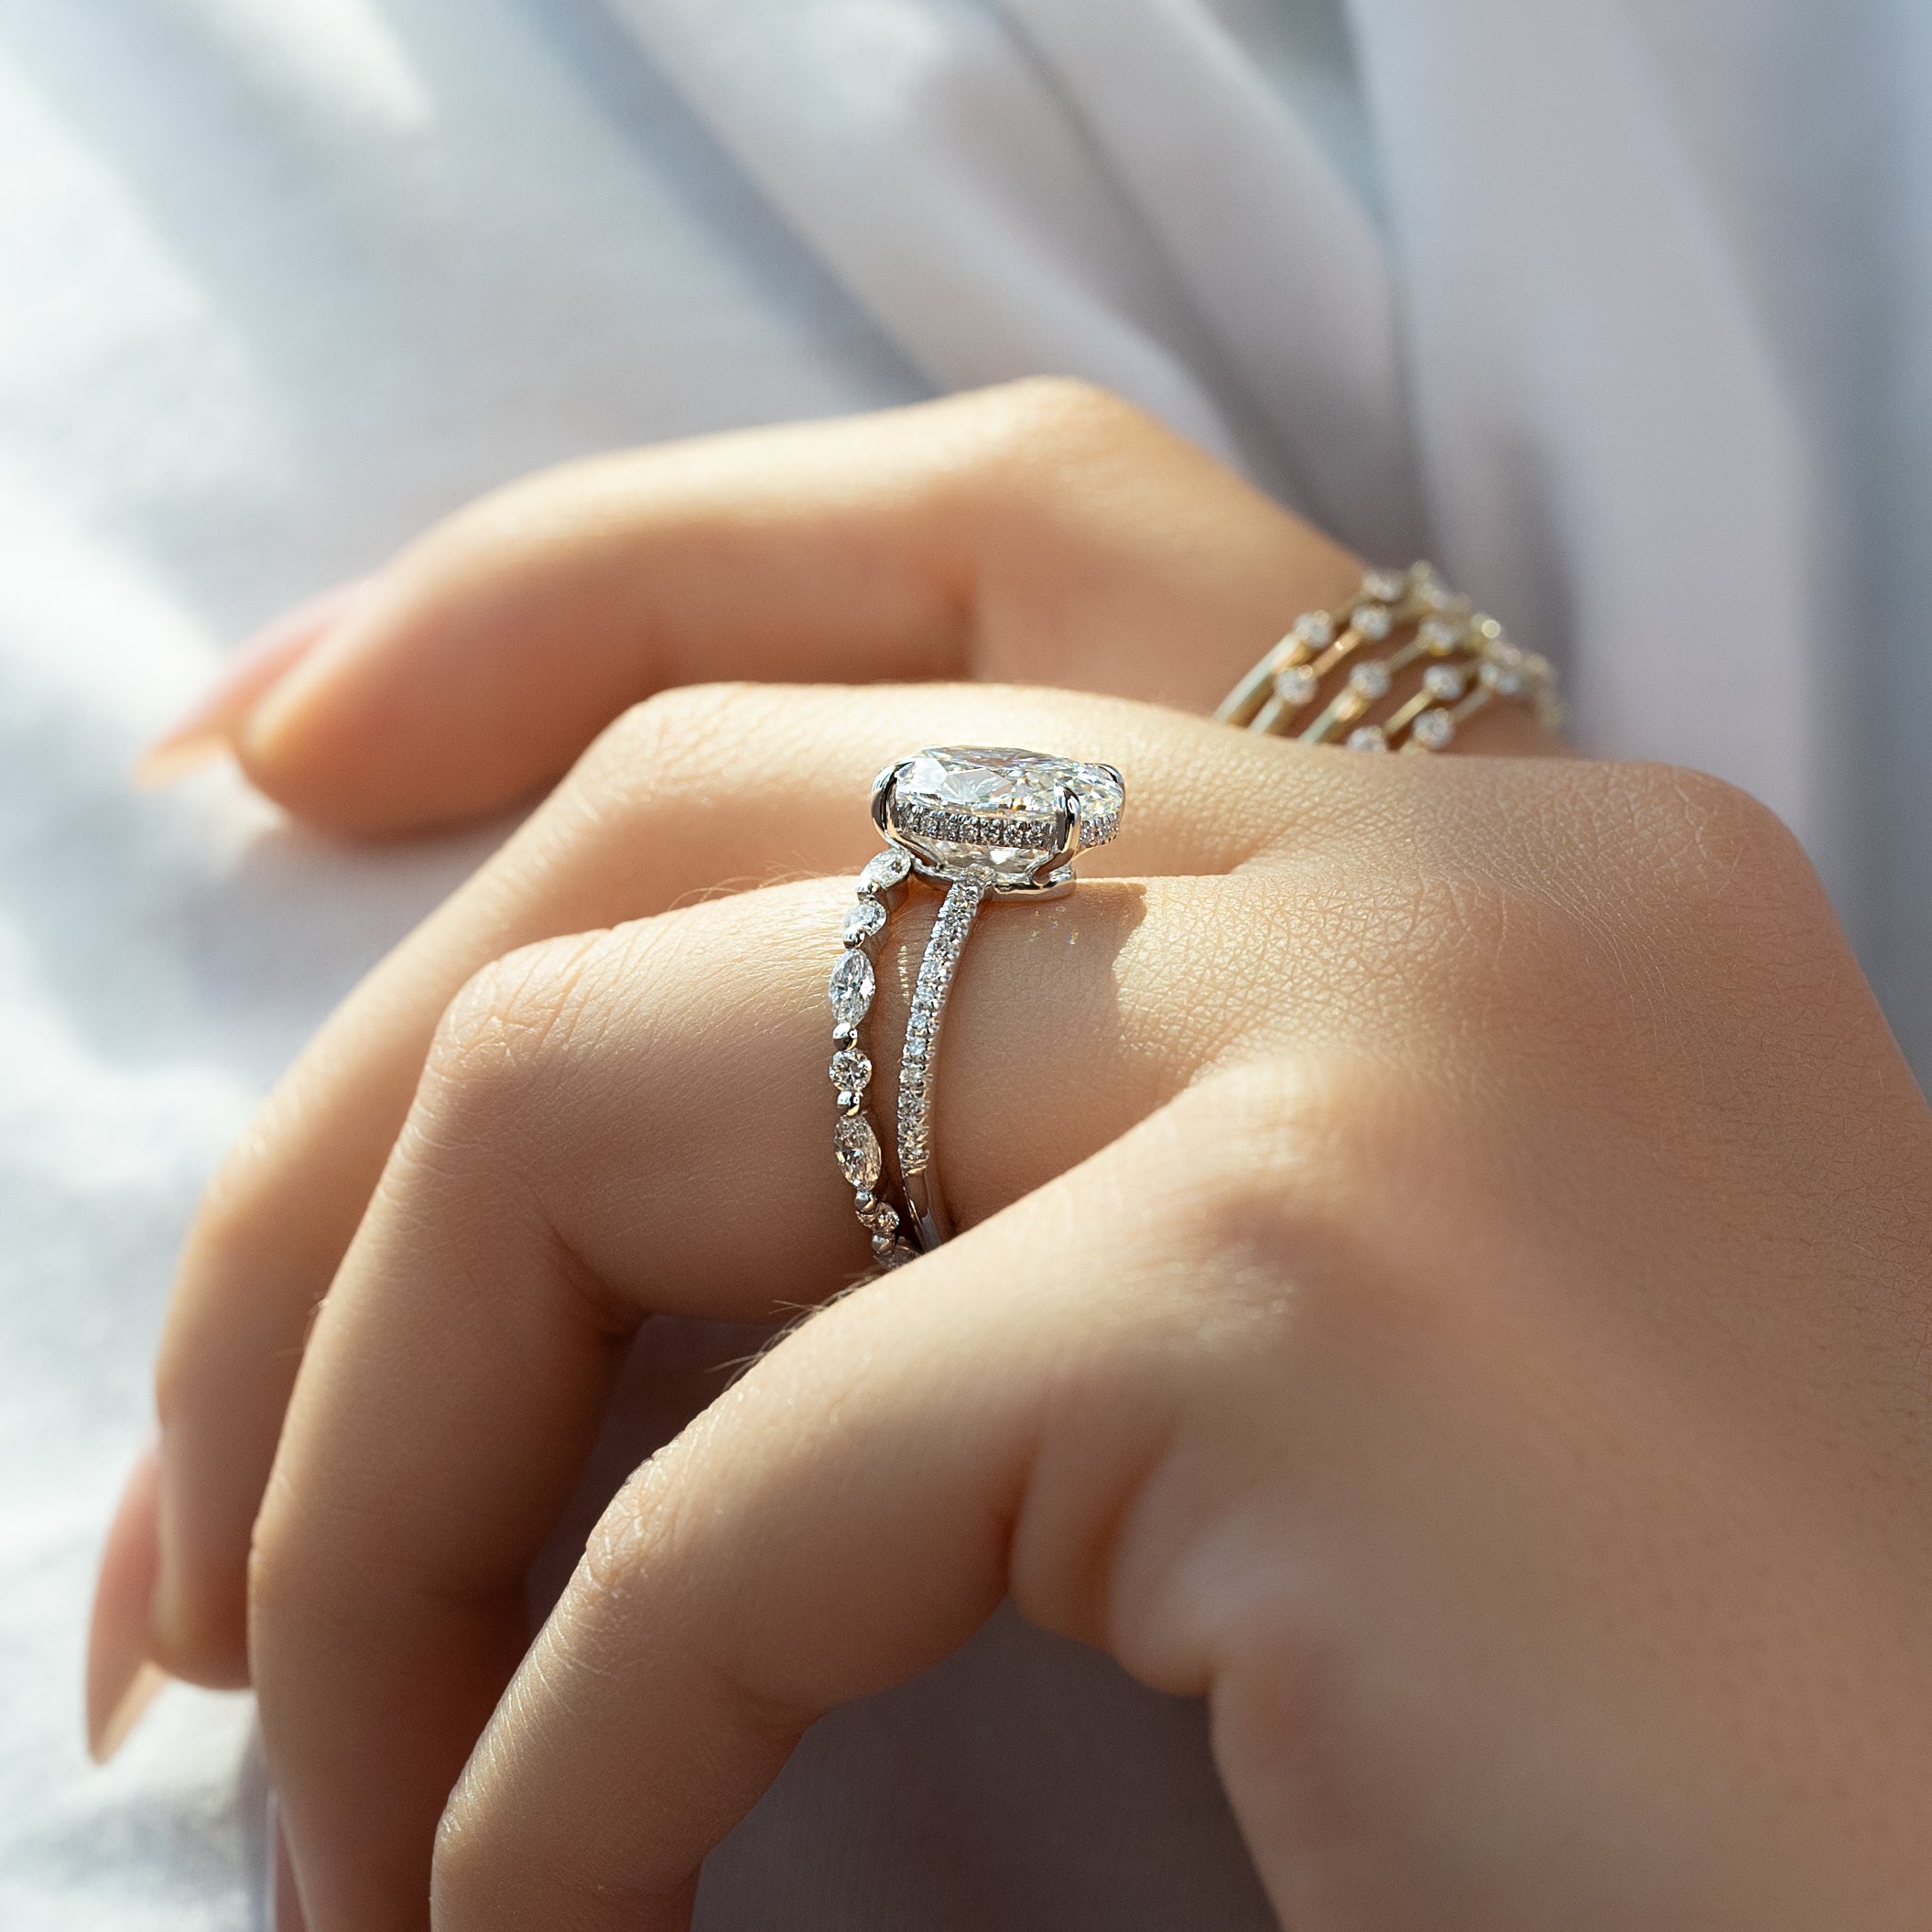 Should you consider a low profile engagement ring? – Lacee Alexandra